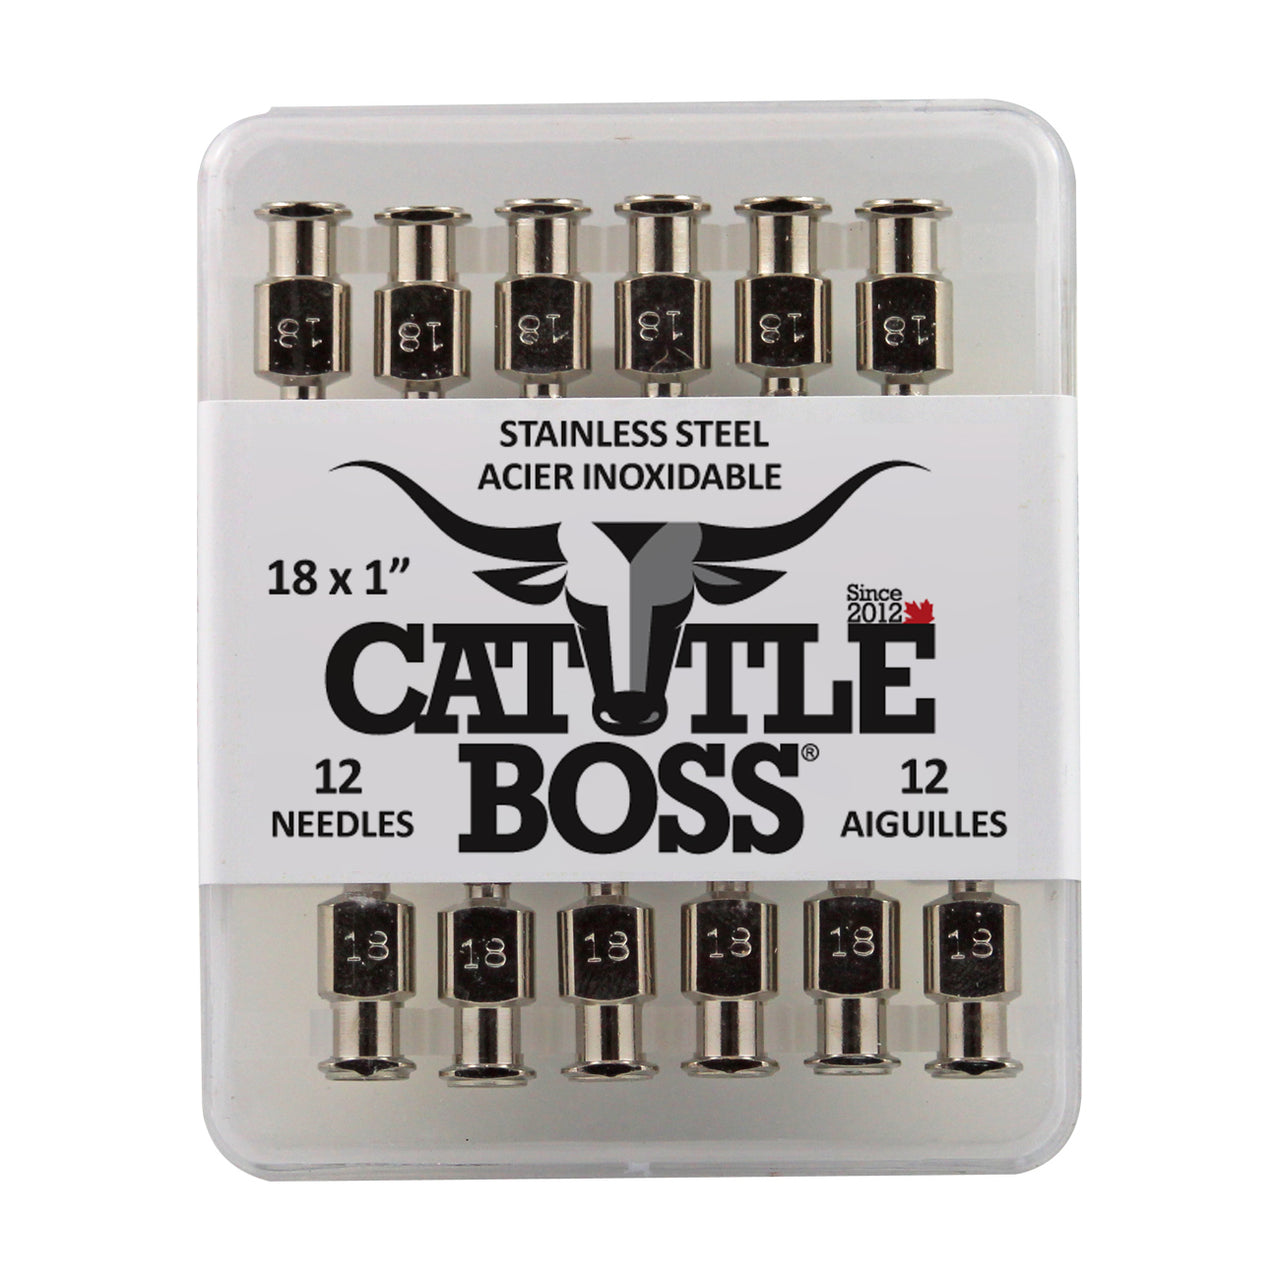 Cattle Boss Stainless Steel Hub Needle (12 Pack) 18X1 - Drug Administration Cattle Boss - Canada